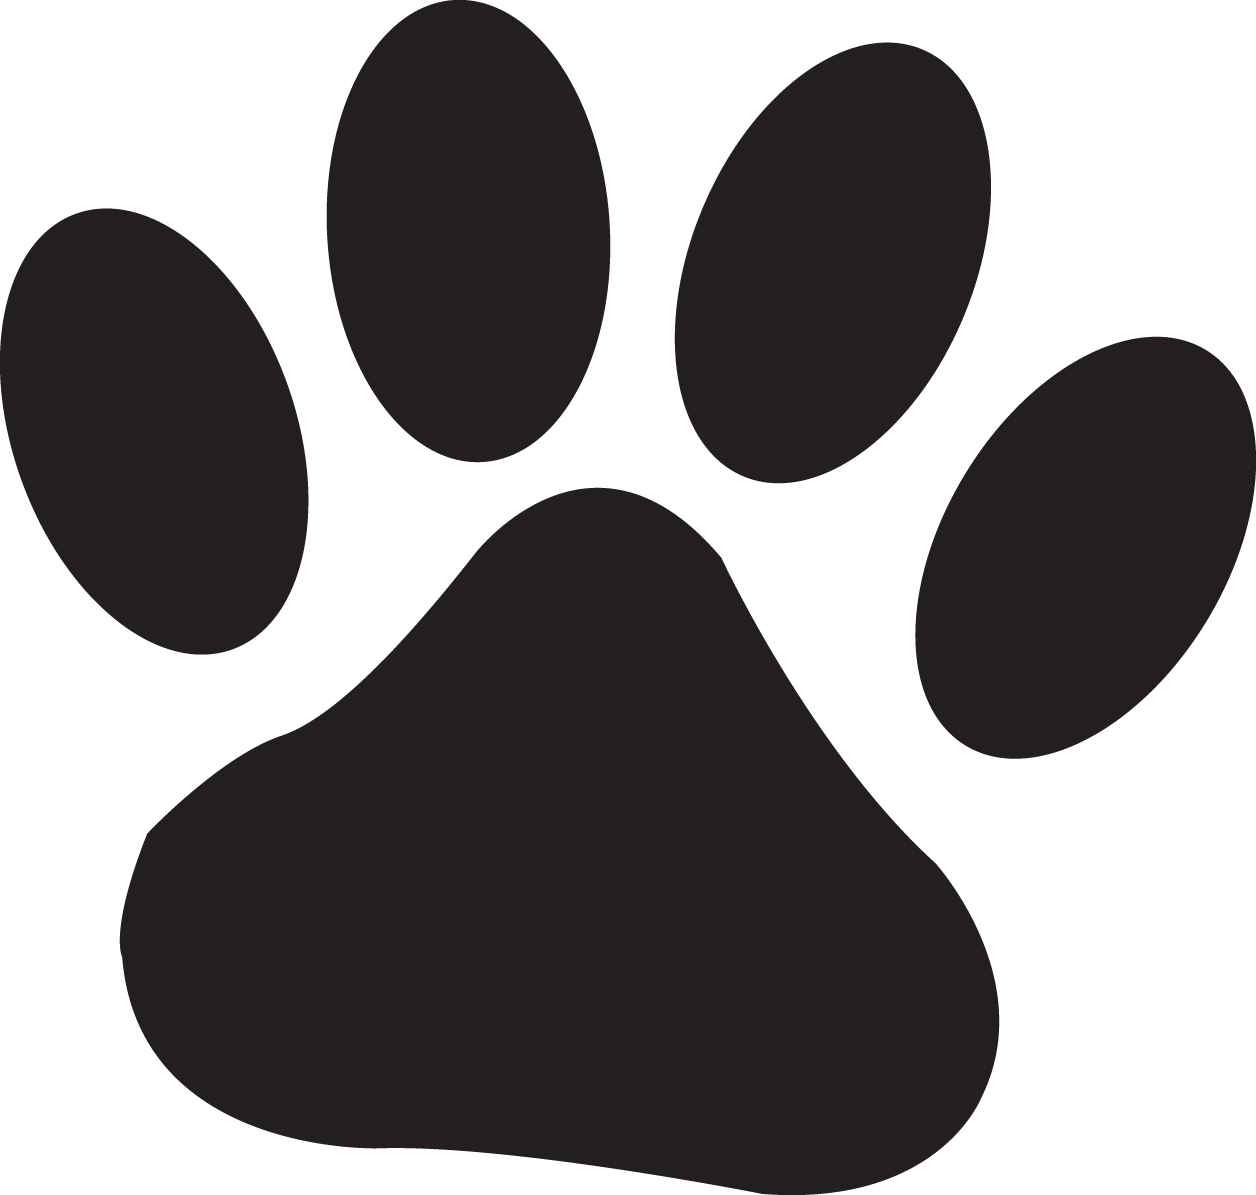 Paw print wildcats on dog paws dog paw tattoos and clip art image